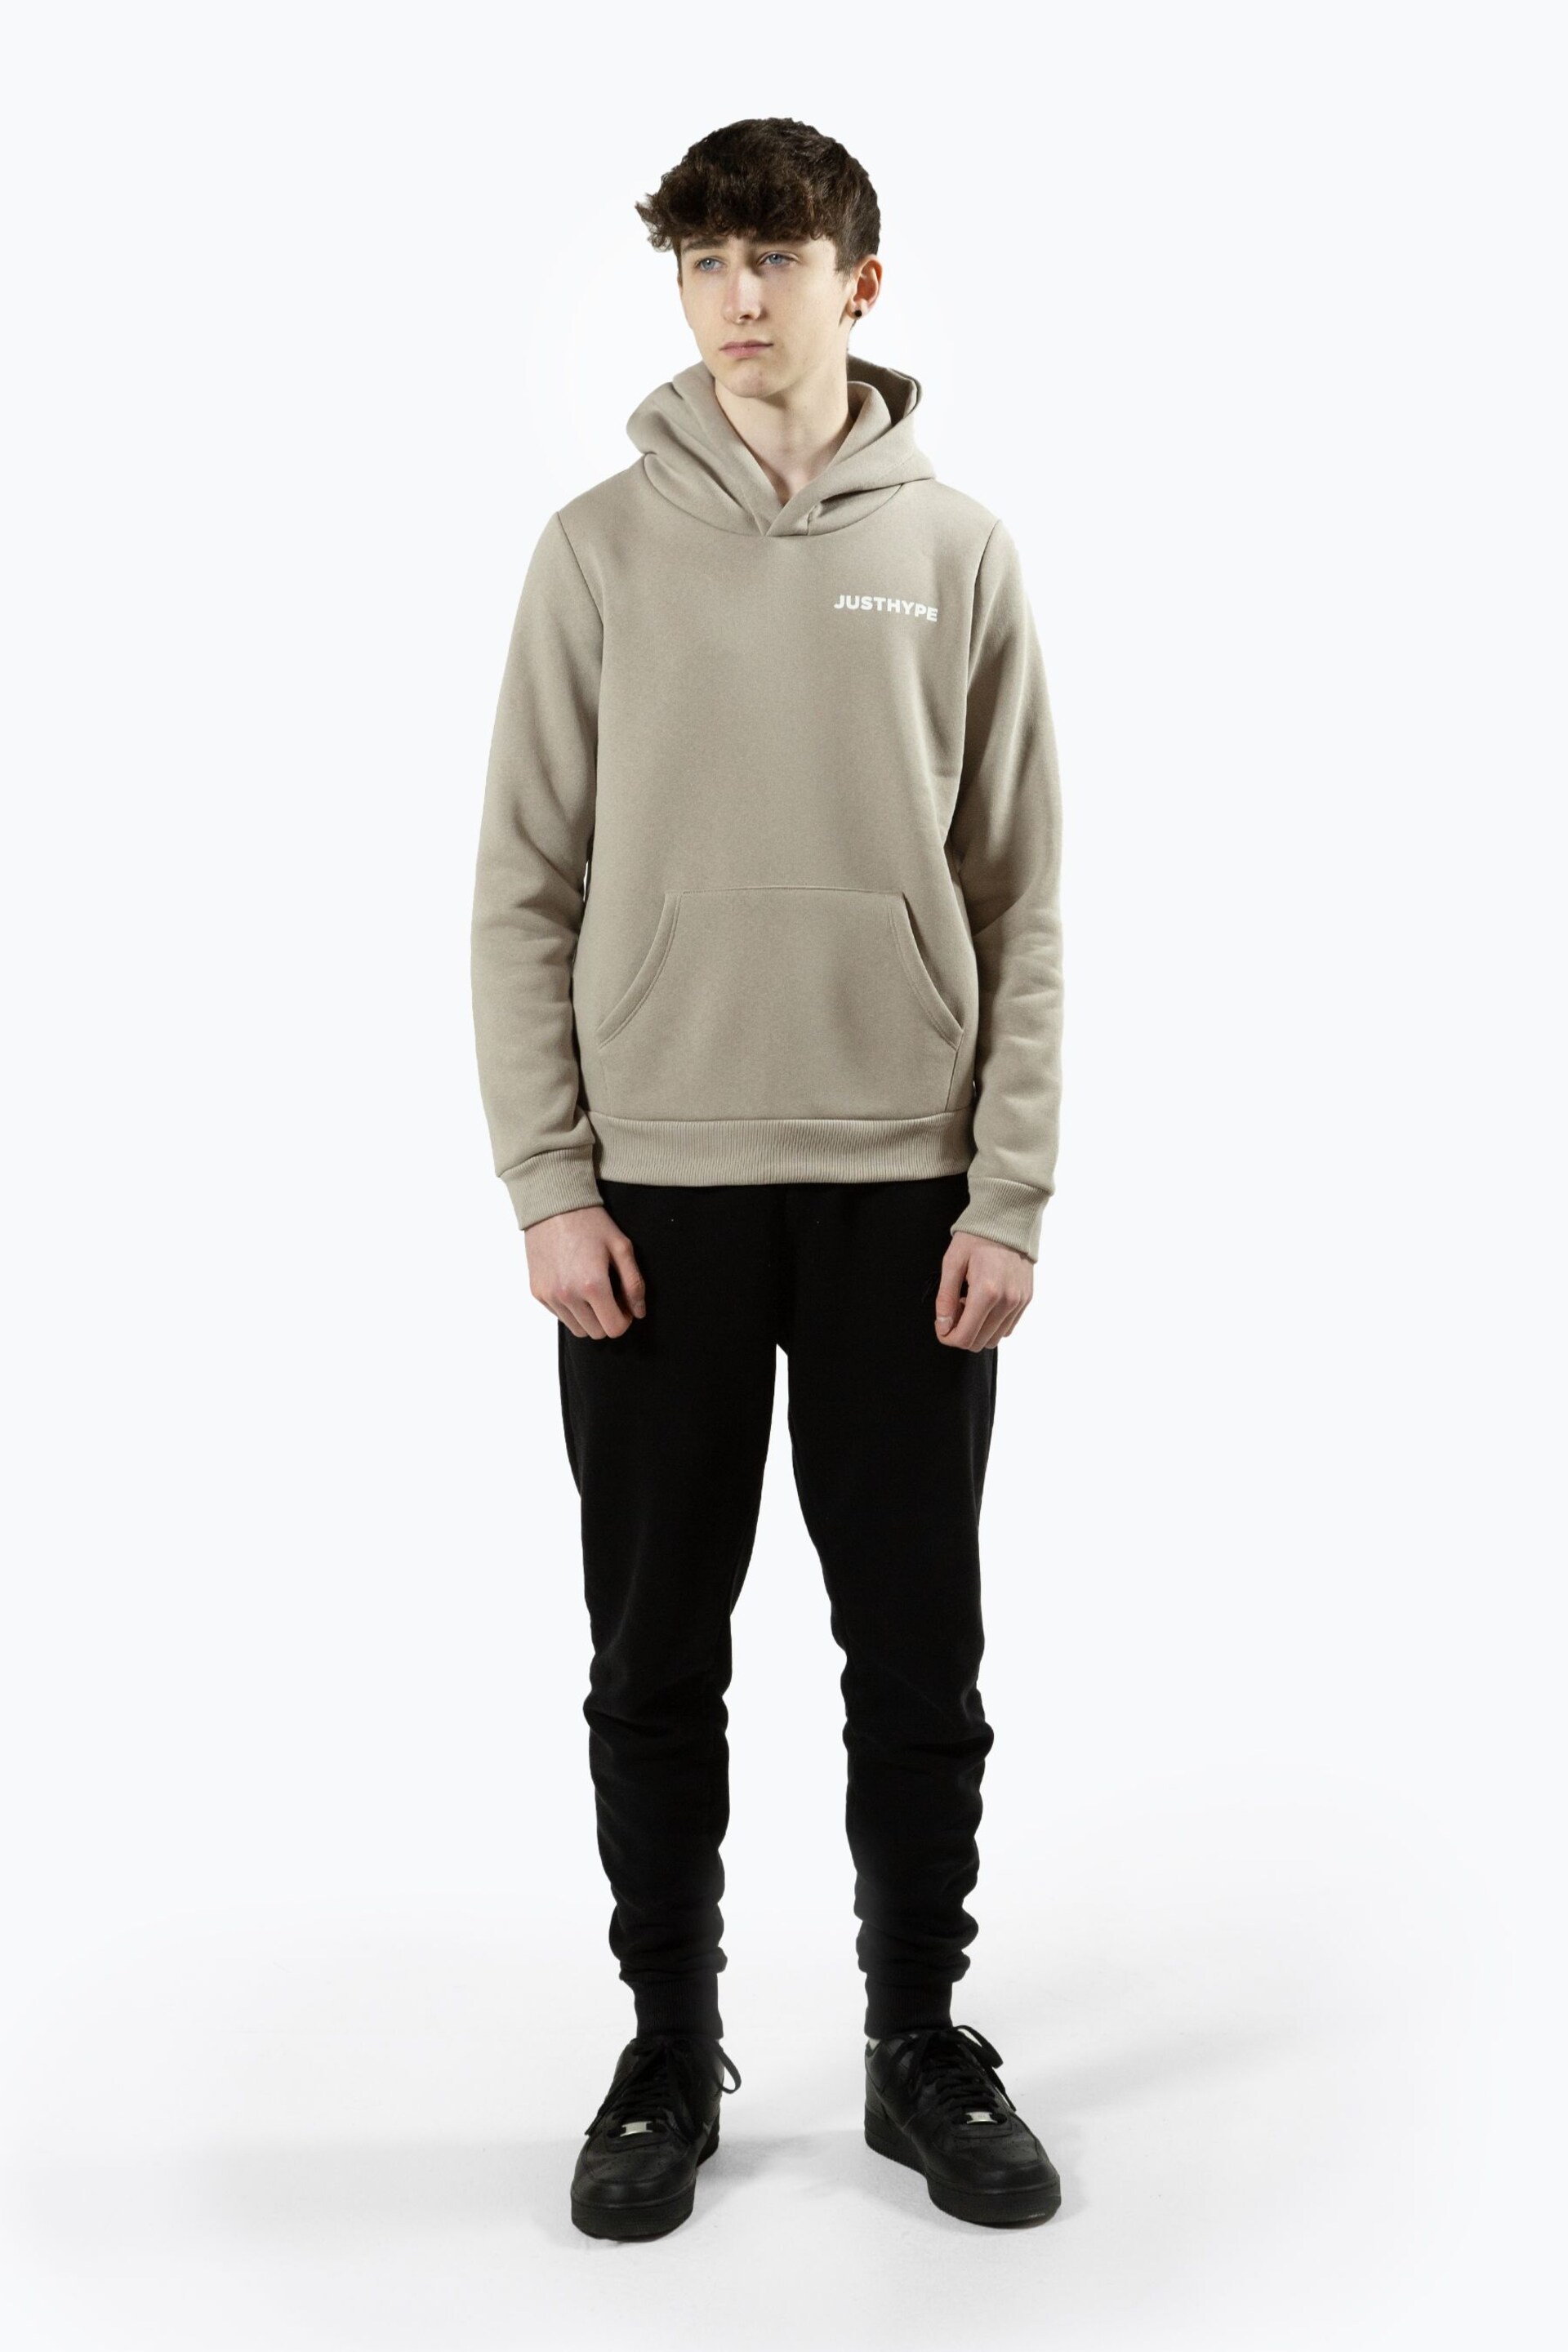 Hype Boys Decade Neutral Hoodie - Image 4 of 5